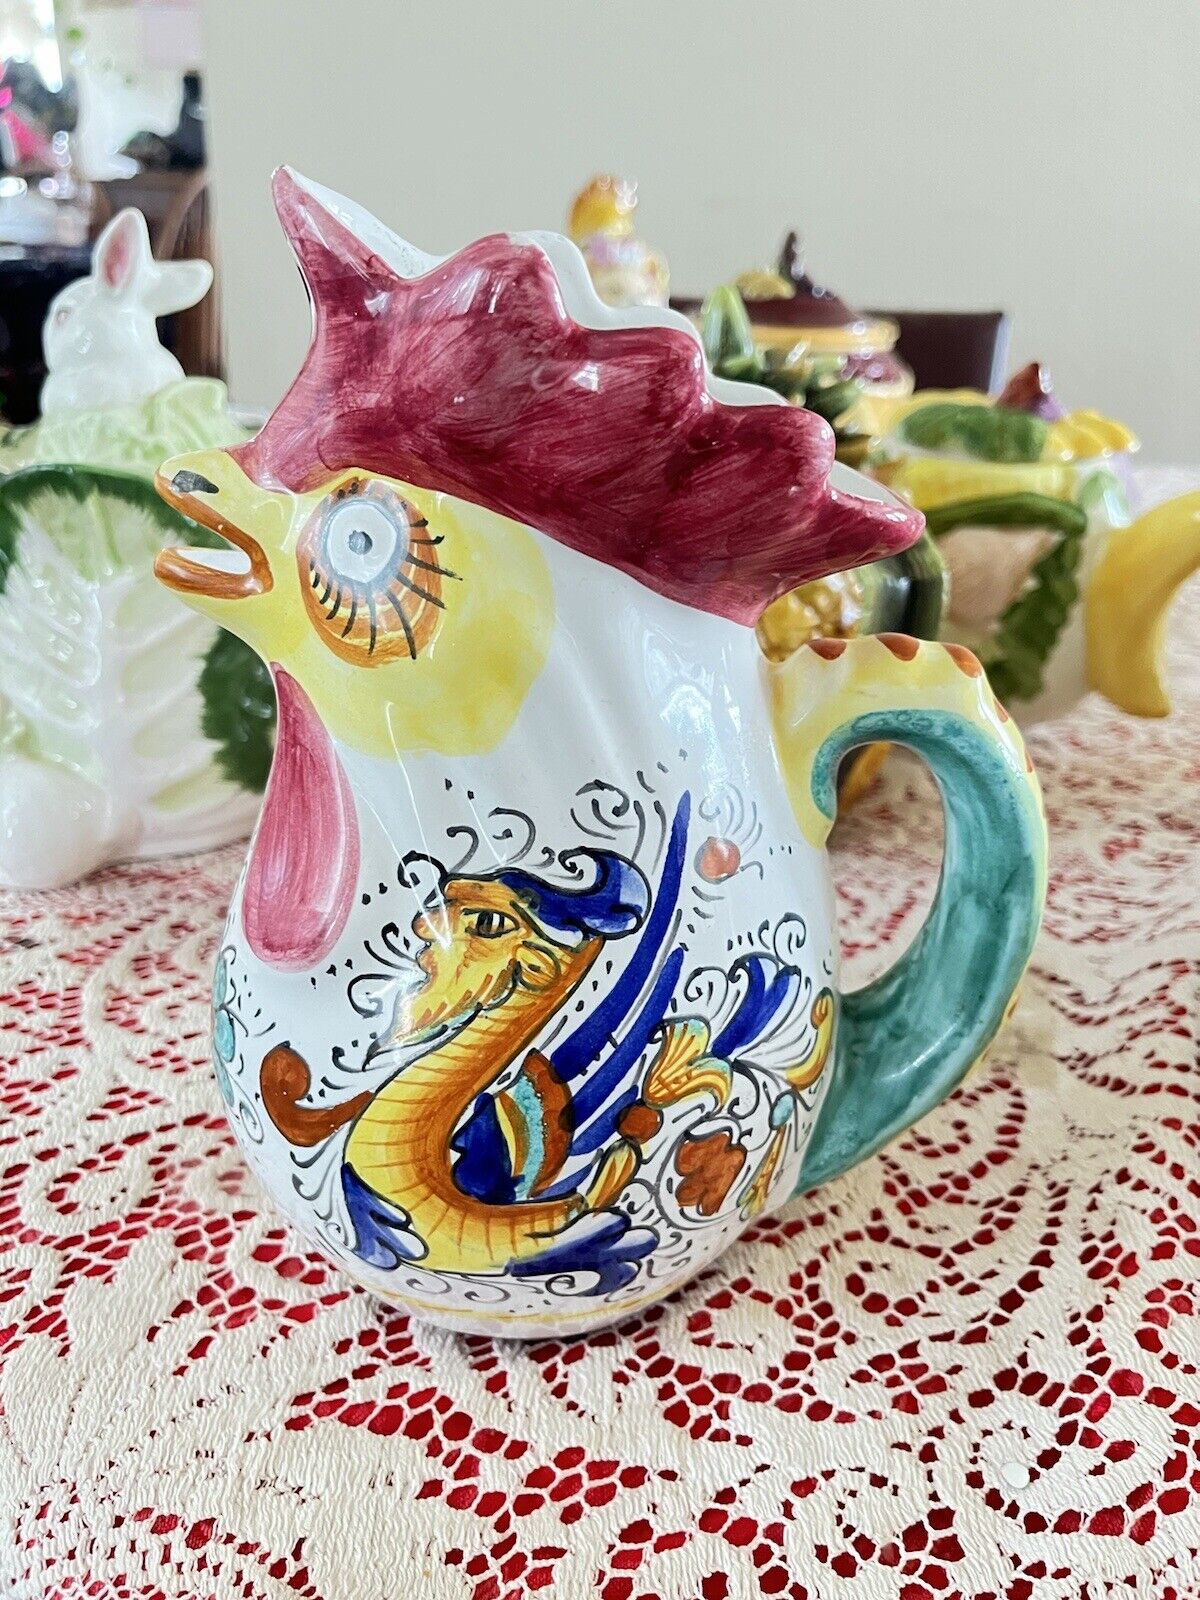 William Sonoma Hand Painted Majolica Deruta Style Rooster Pitcher